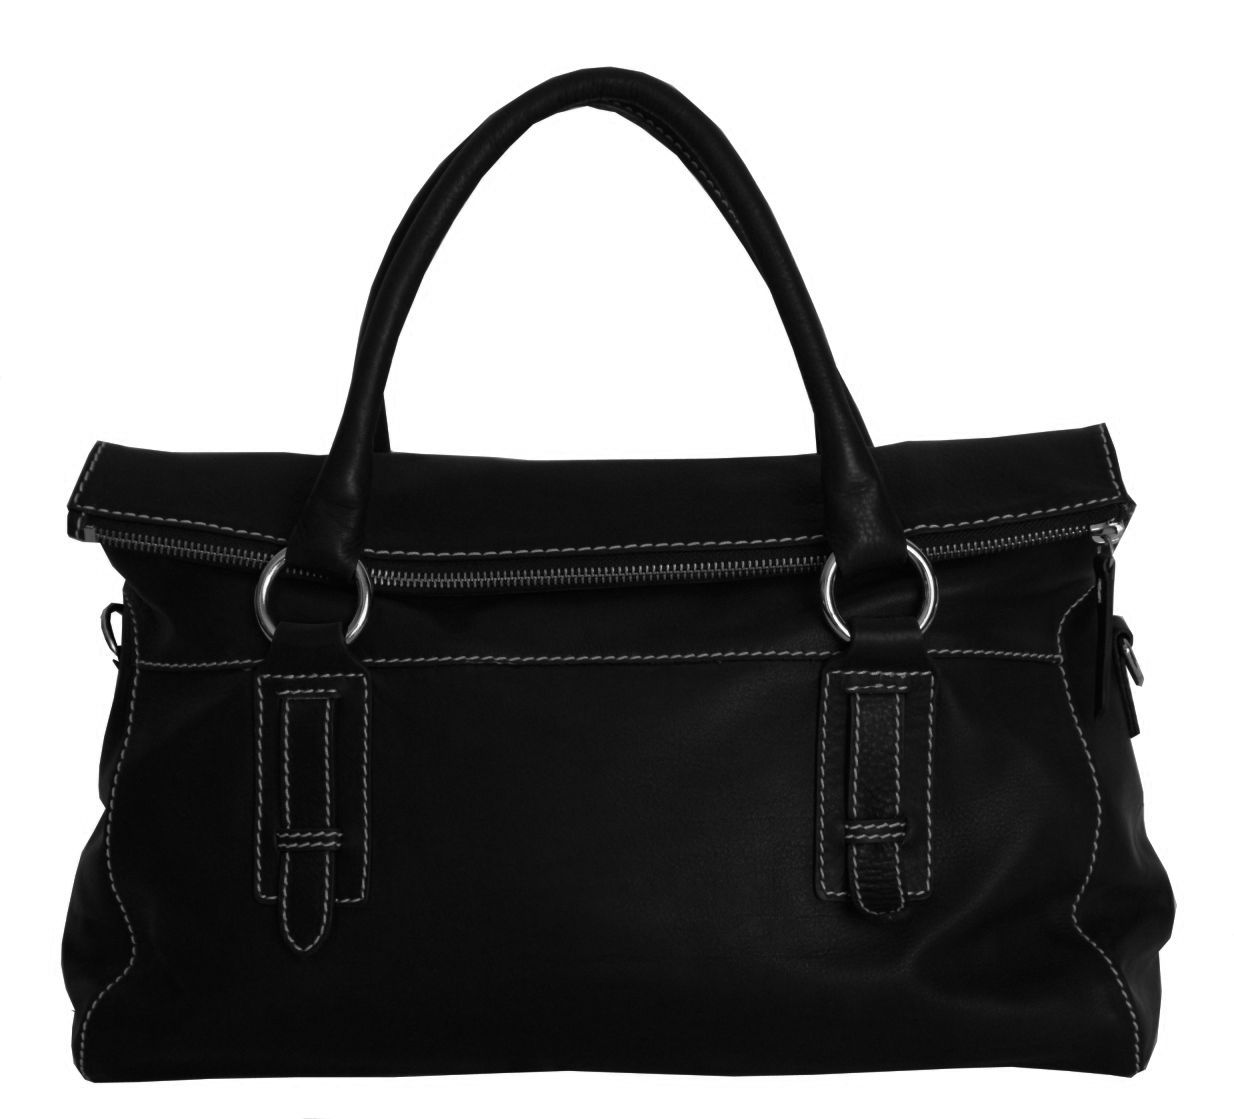 The Canada Leathers Collection - New Arrivals Adrian Klis Bag style ...